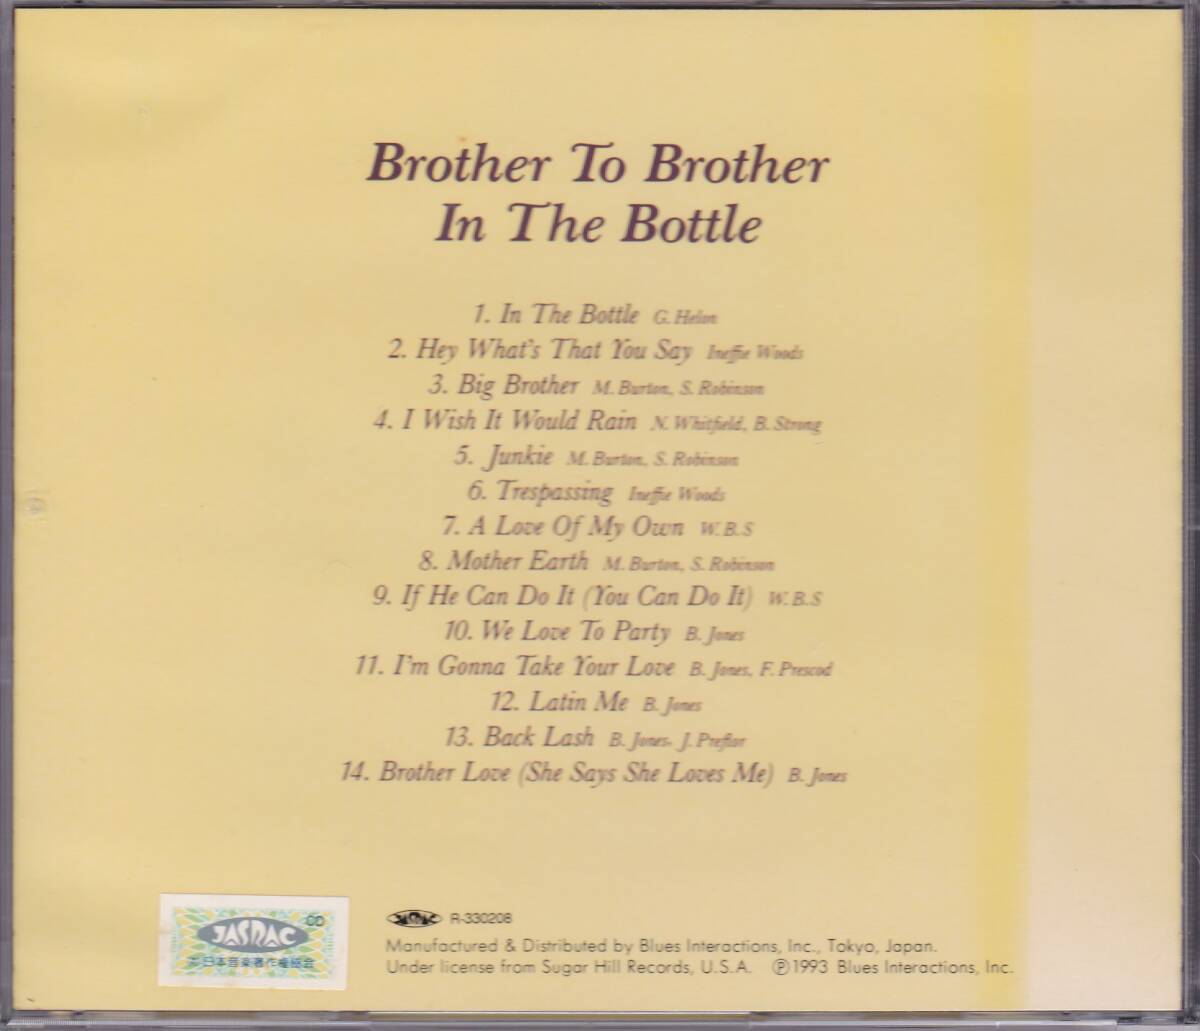 Rare Groove/ファンク/ソウル■BROTHER TO BROTHER / In The Bottle +5 (1974) レア廃盤 AtoZディスクガイド掲載作!! 唯一のCD化盤 Moments_画像2